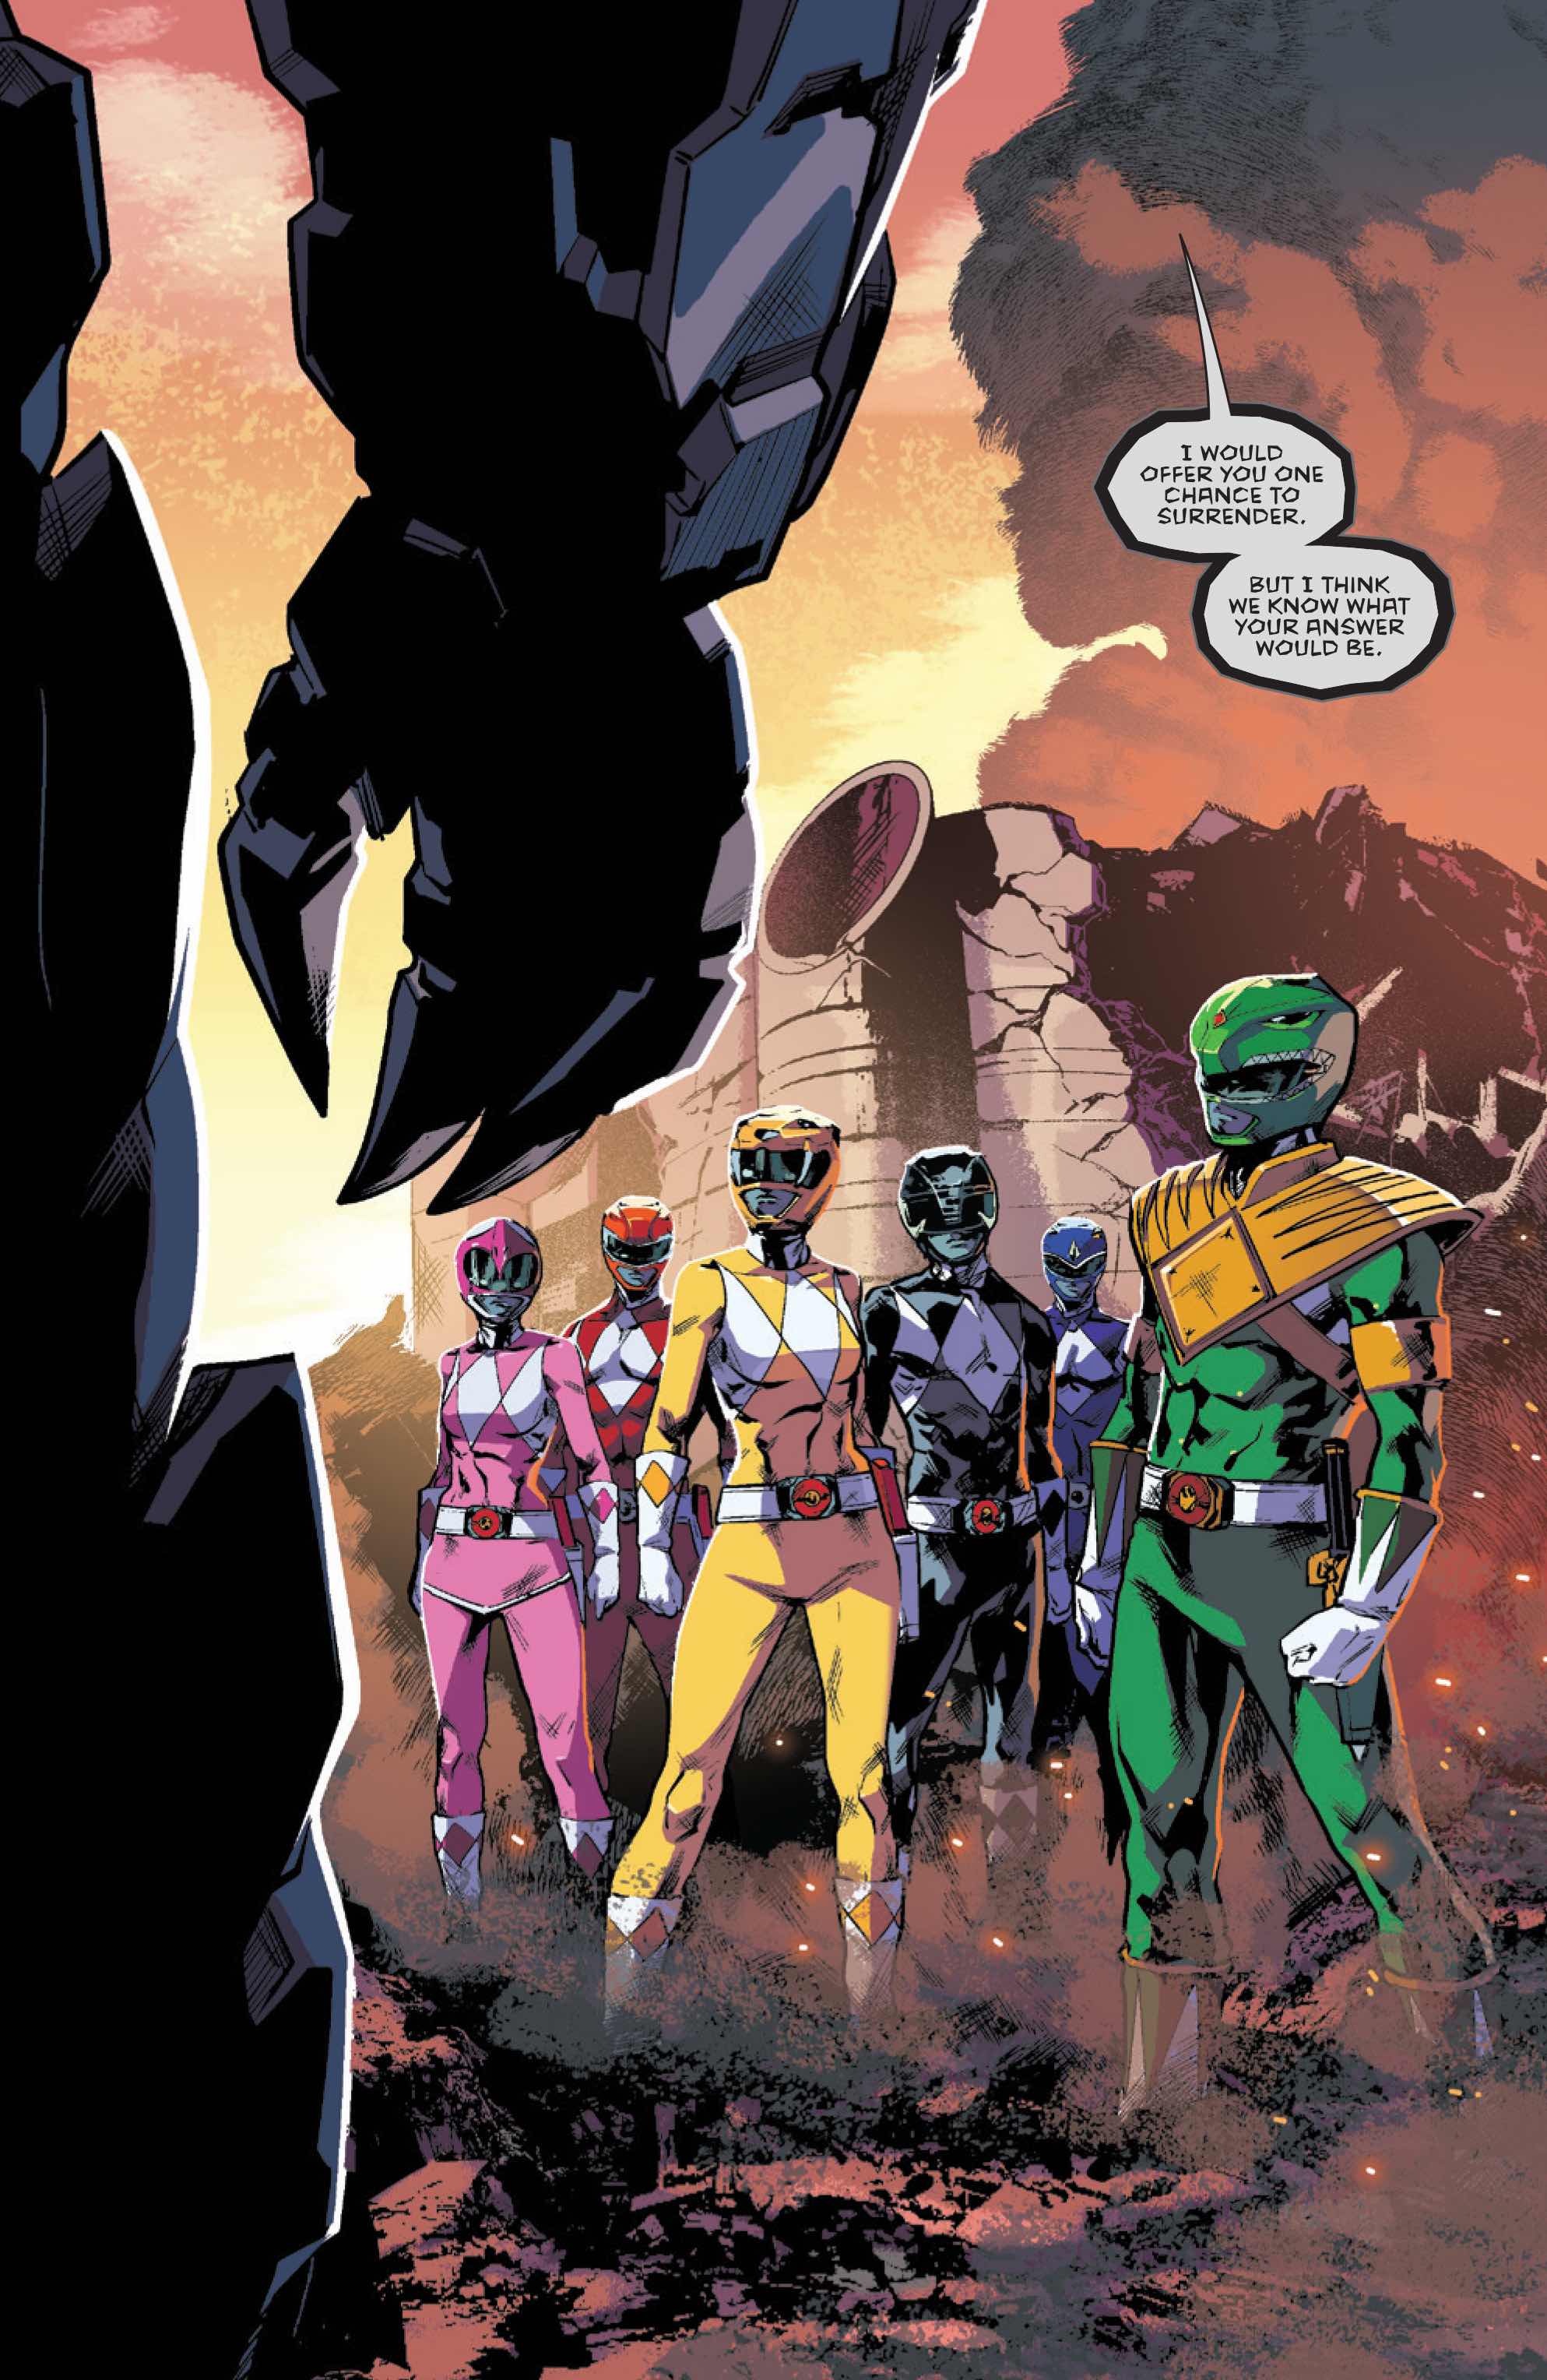 Mighty Morphin Power Rangers #6 Review